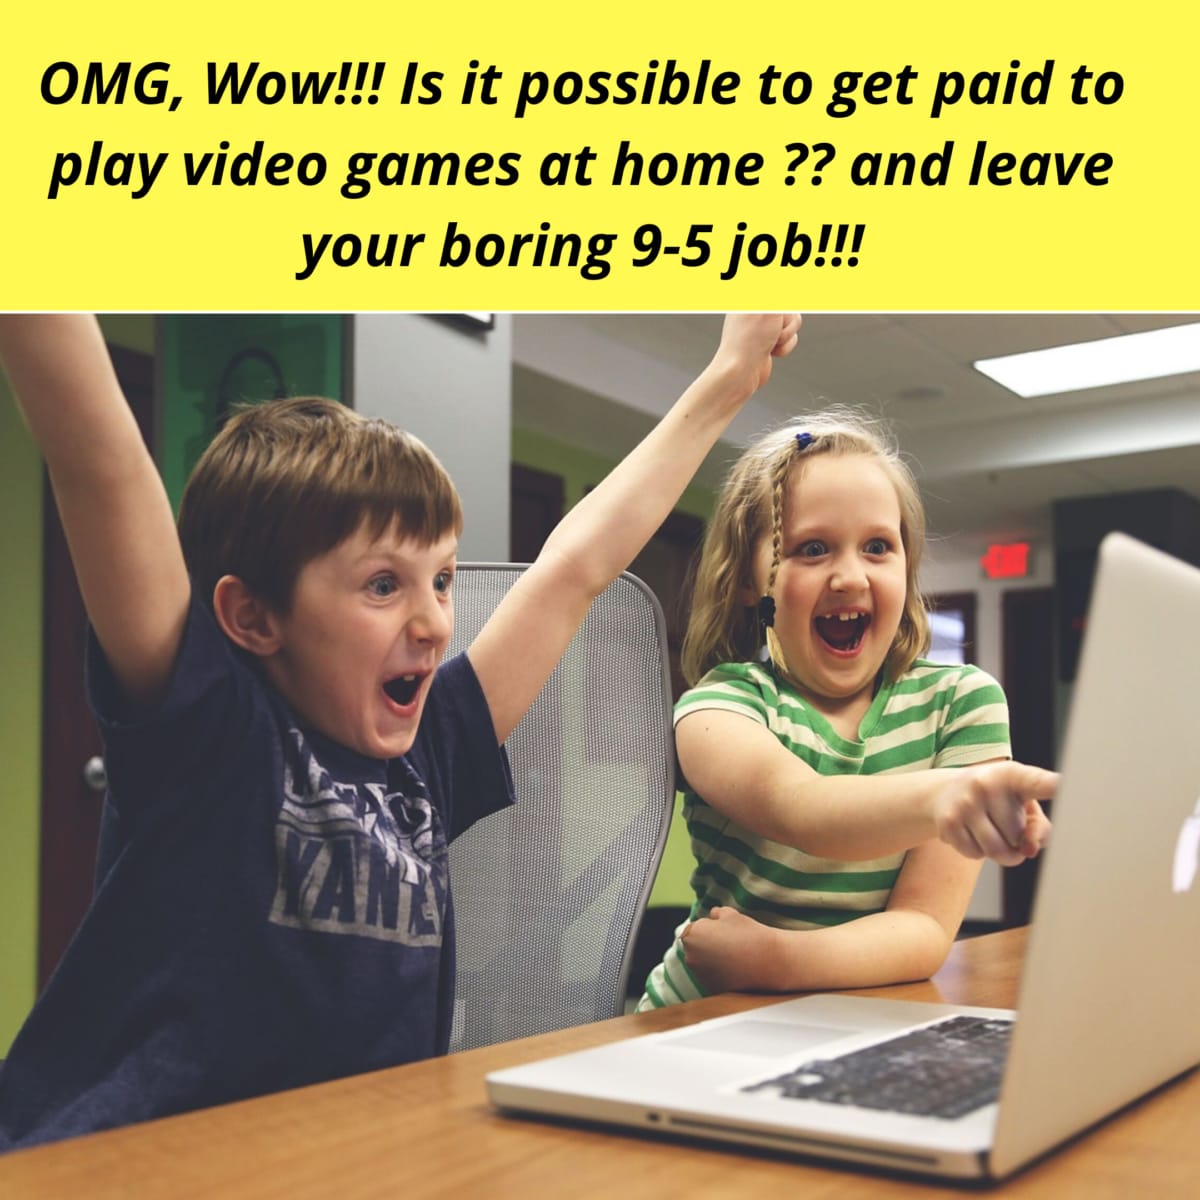 How can I get Paid To Play Video Games at home?